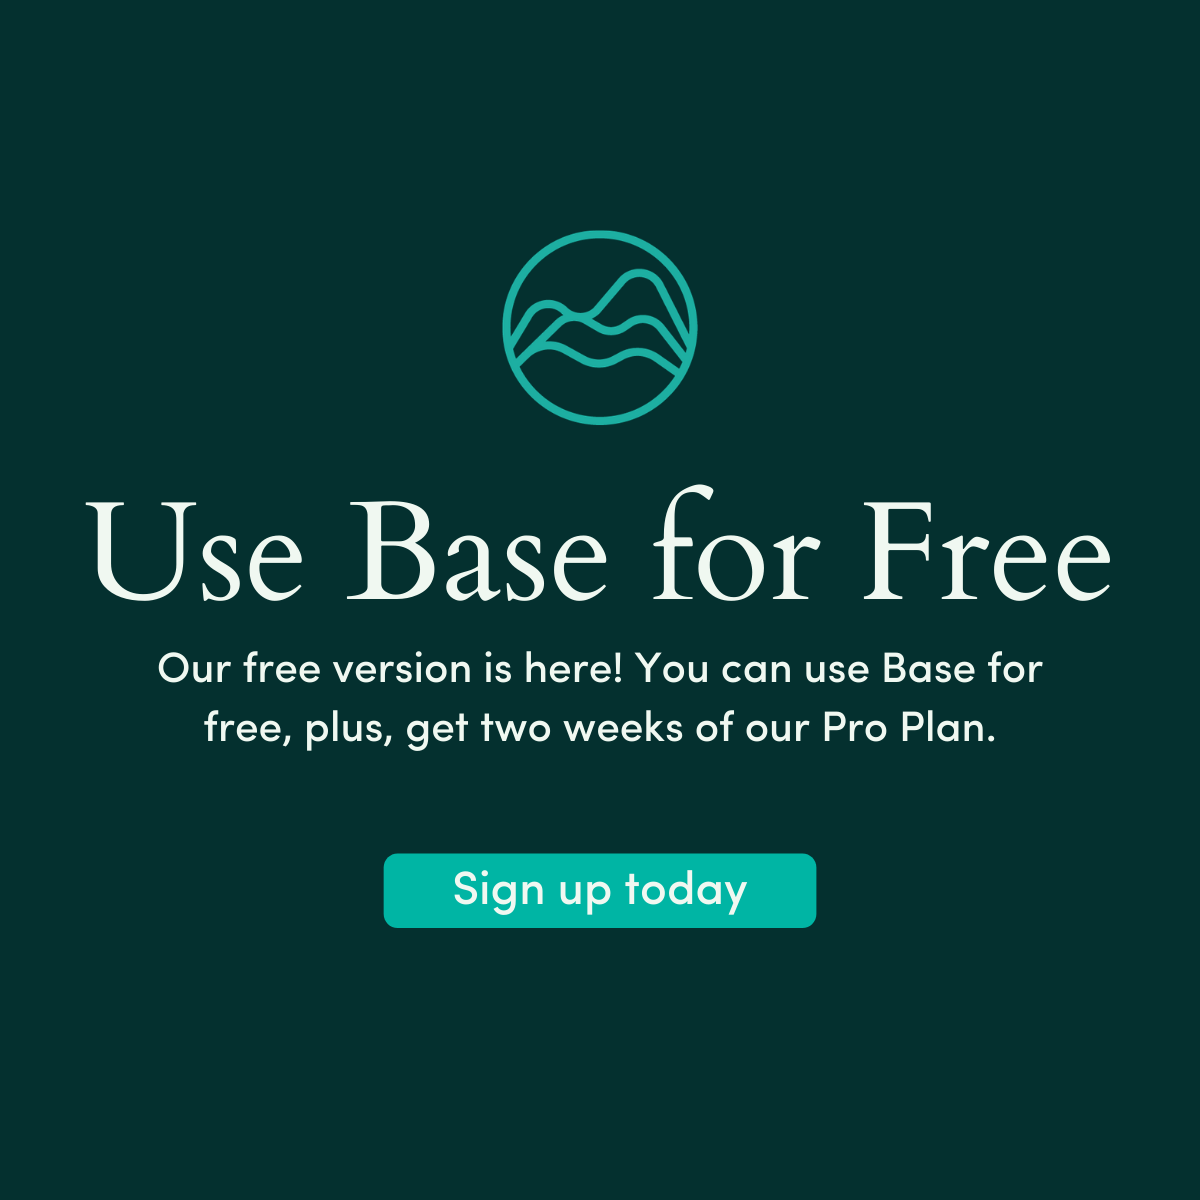 Try Base for Free (1)